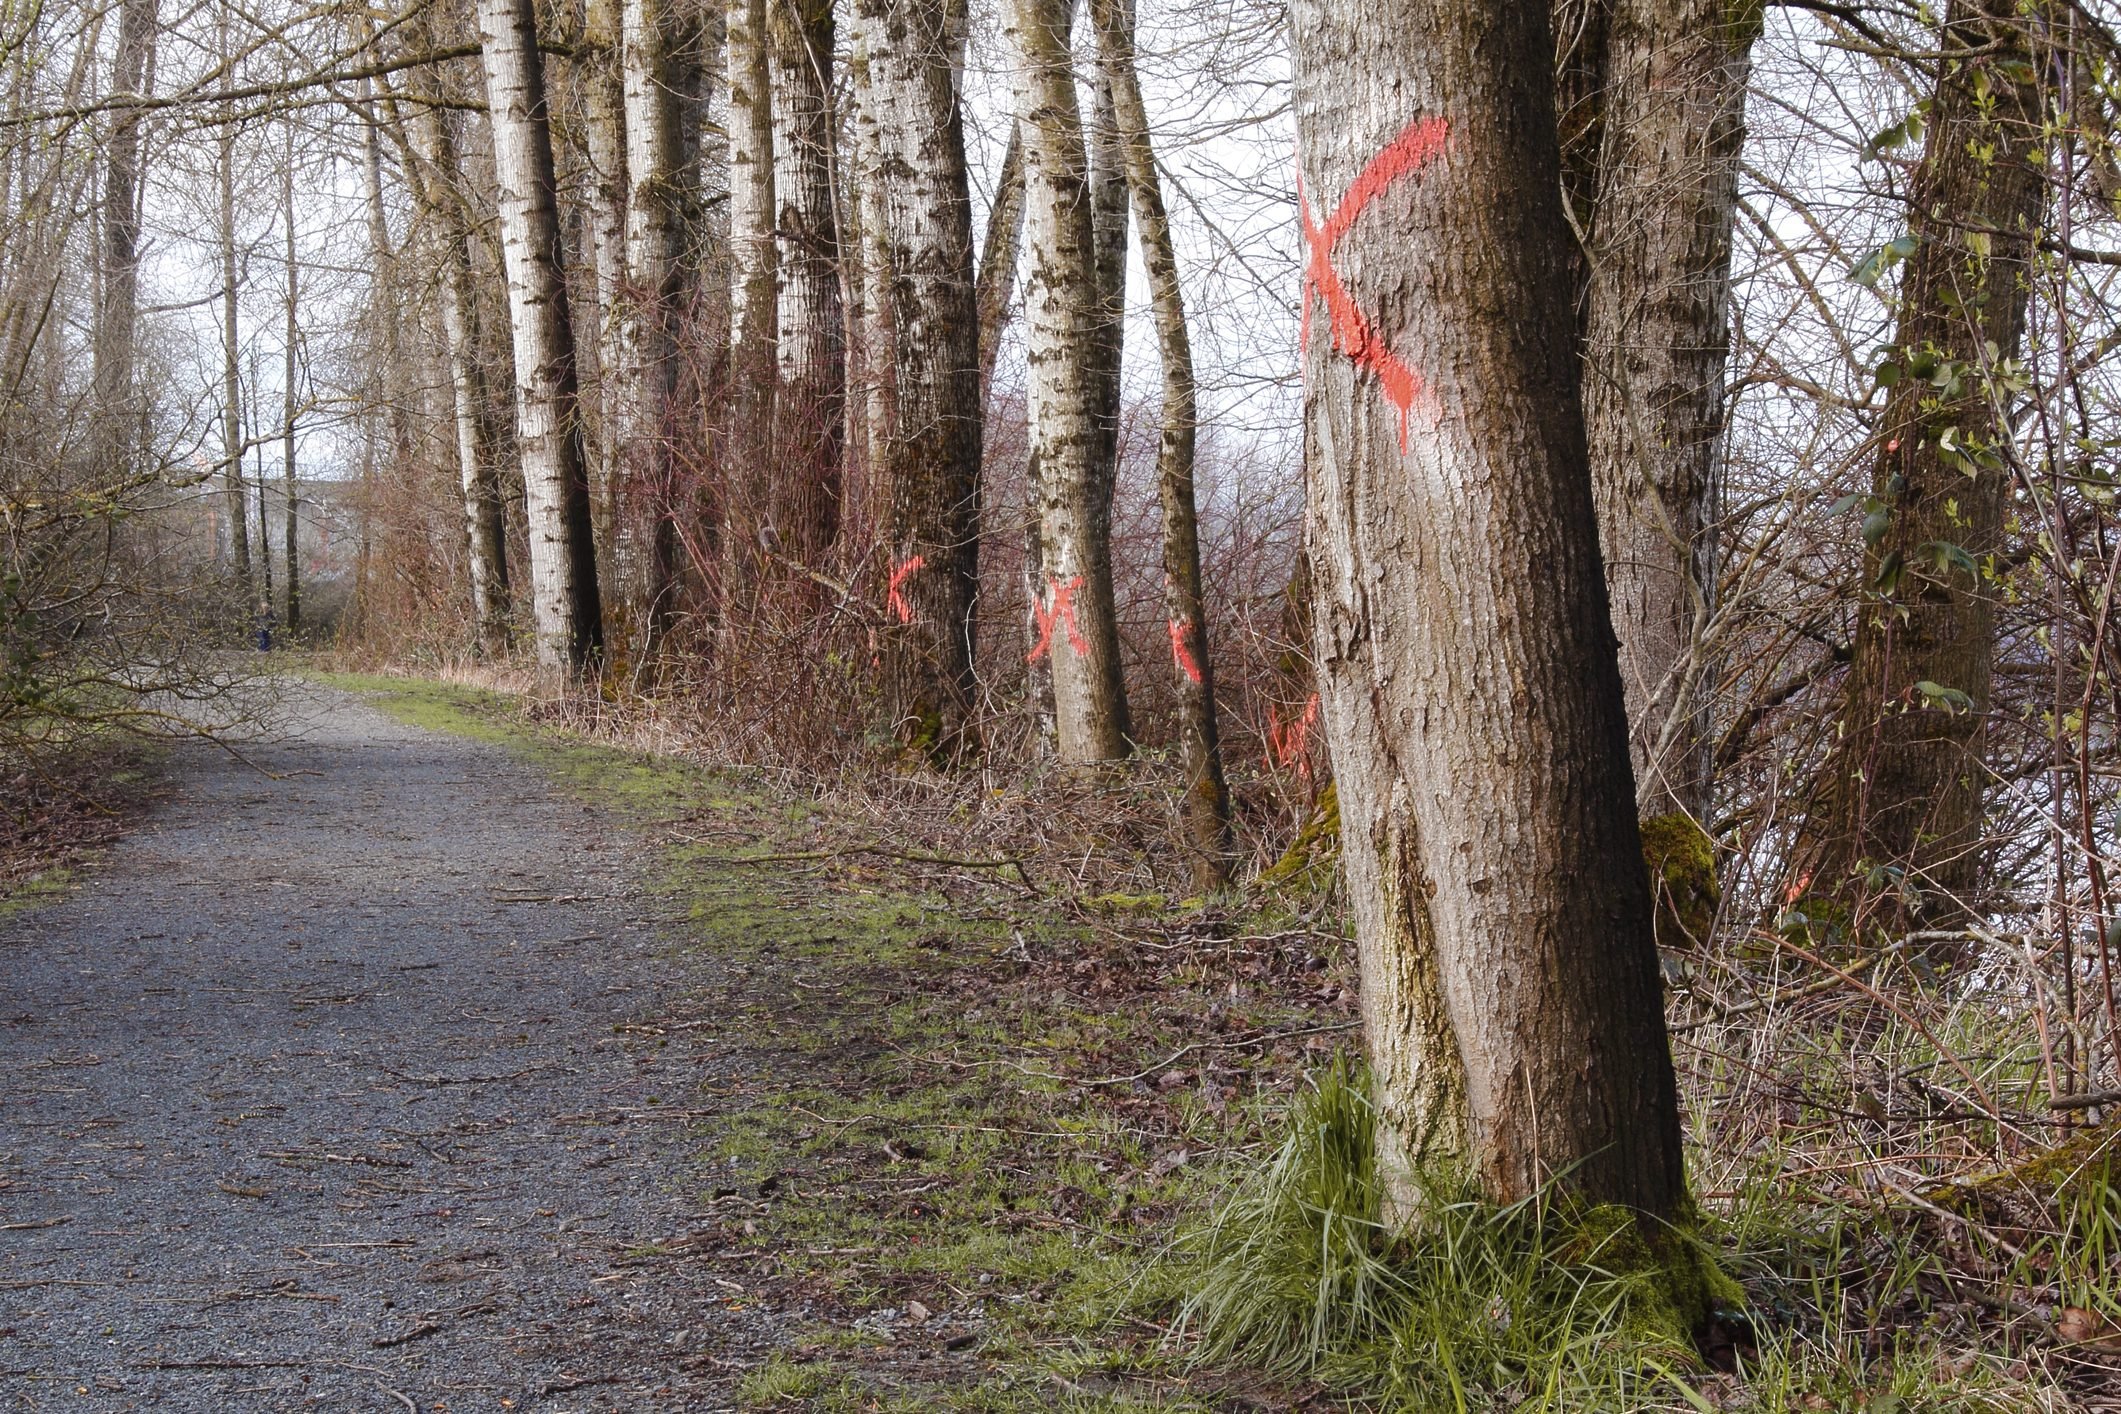 If You See Paint on Trees, This Is What It Means